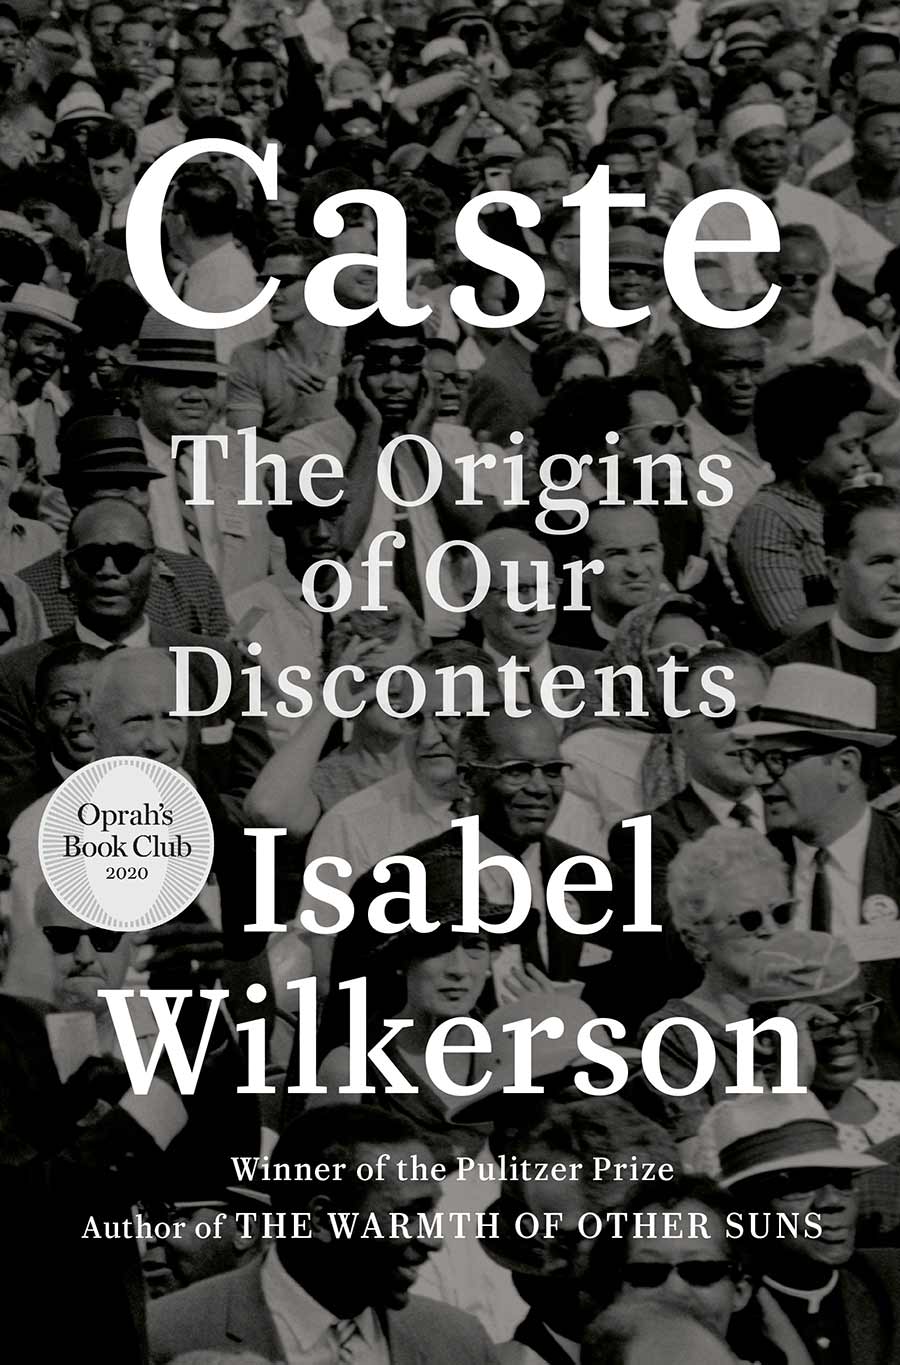 Book jacket for Caste: The Origins of Our Discontents.